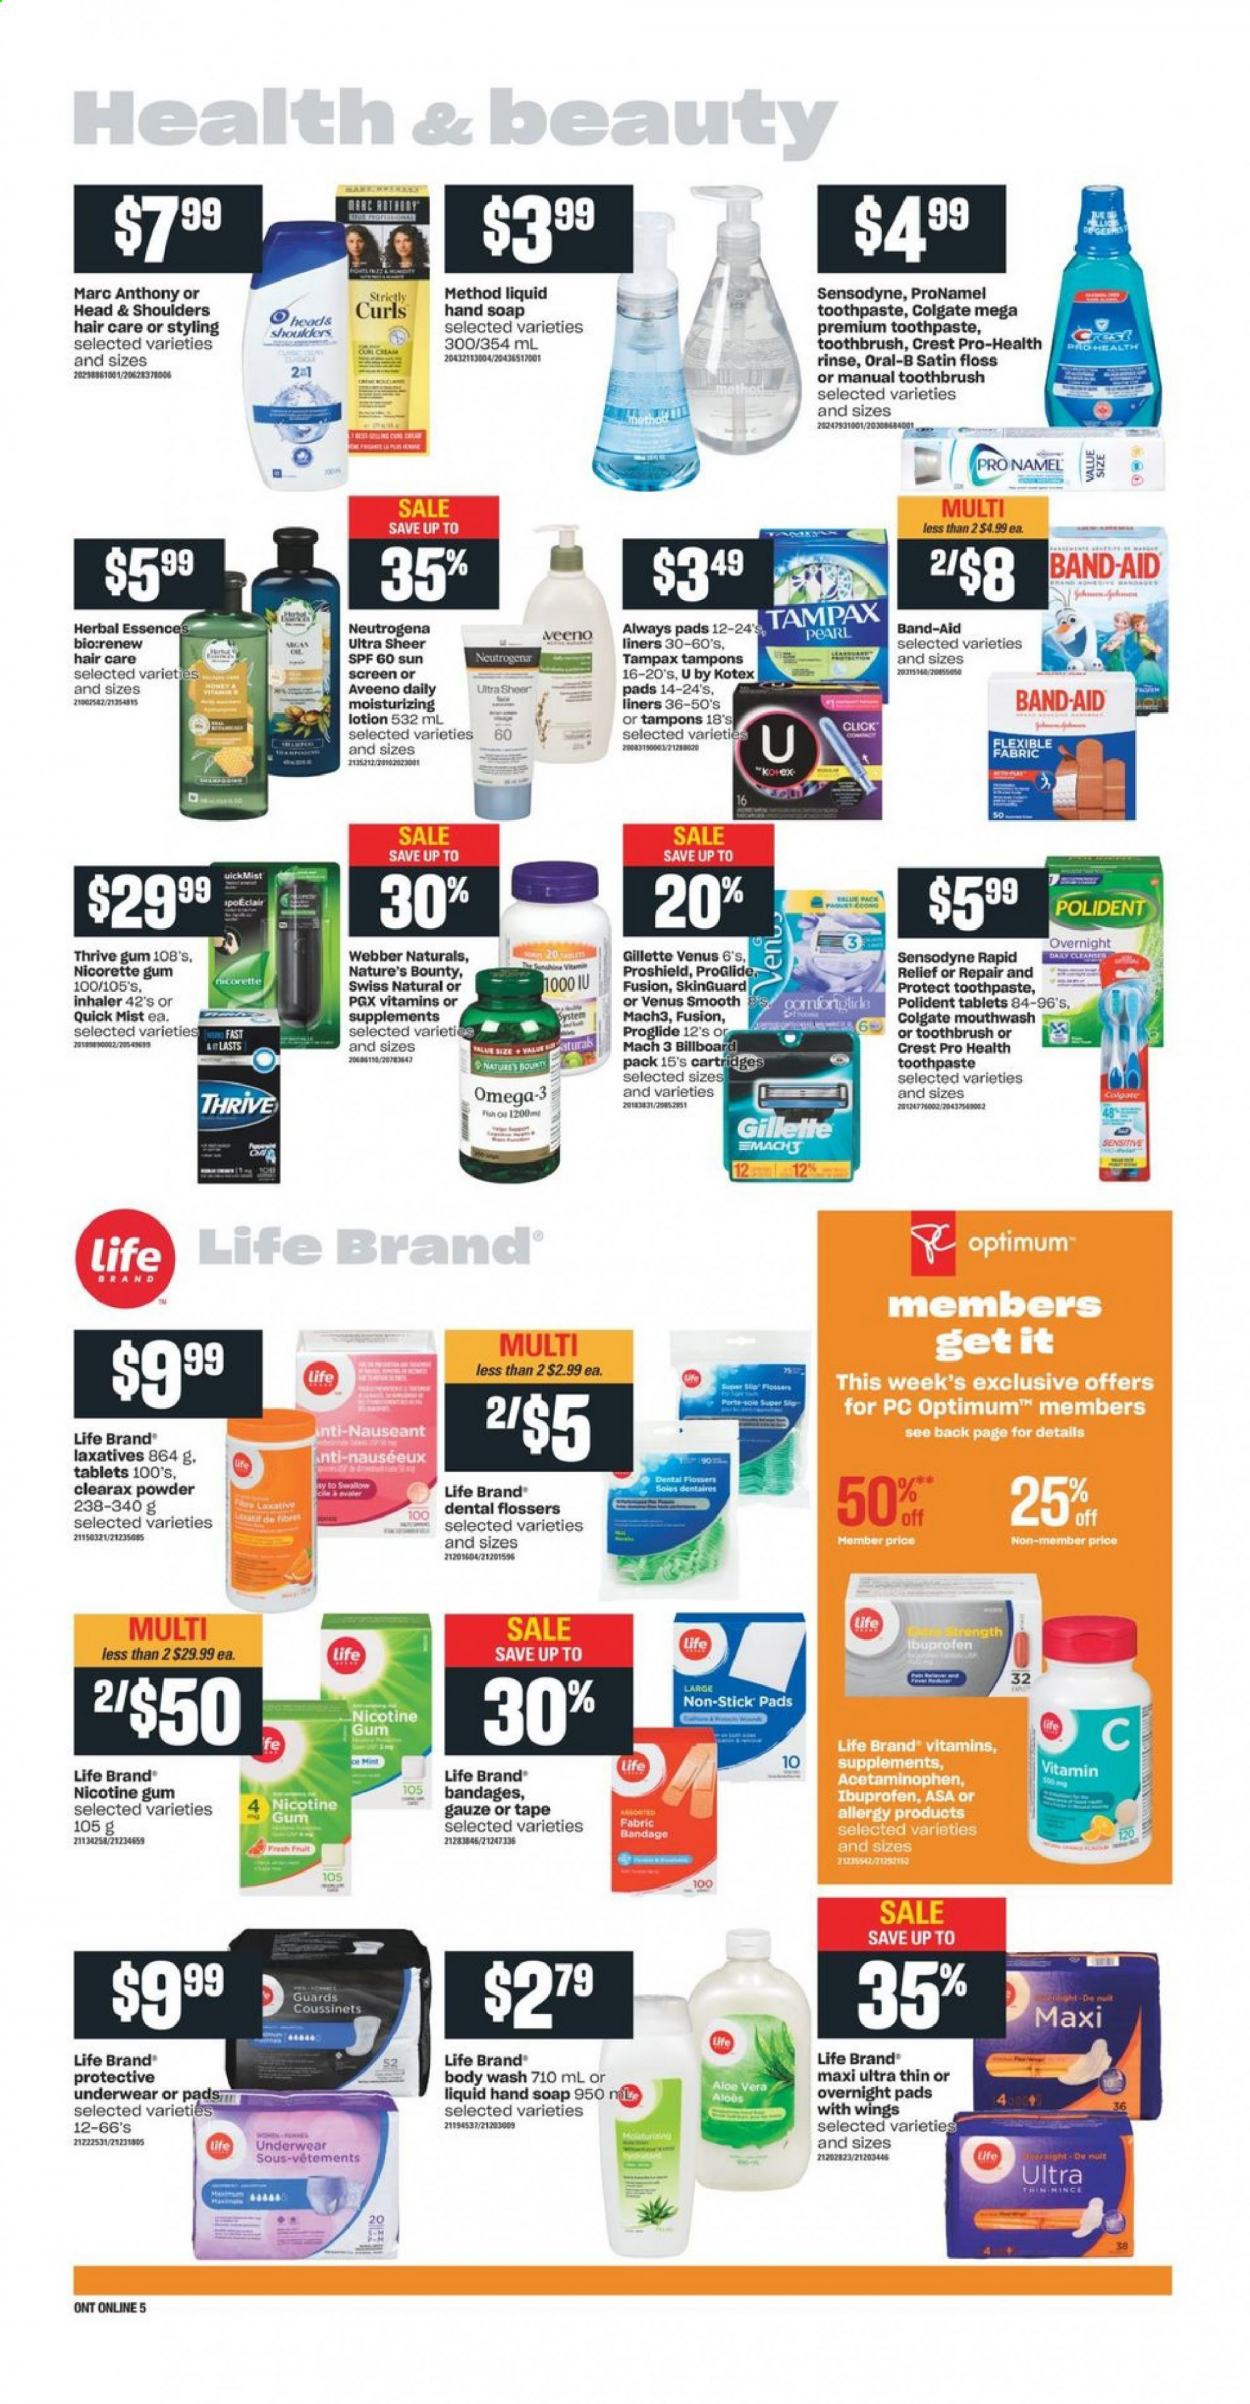 thumbnail - Independent Flyer - June 10, 2021 - June 16, 2021 - Sales products - Aveeno, body wash, hand soap, soap, toothbrush, toothpaste, mouthwash, Polident, Crest, Always pads, sanitary pads, Kotex, Kotex pads, tampons, body lotion, Venus, Optimum, Nature's Bounty, Nicorette, nicotine therapy, Ibuprofen, Omega-3, Nicorette Gum, Gillette, Neutrogena, Tampax, Head & Shoulders, Oral-B, Sensodyne. Page 10.